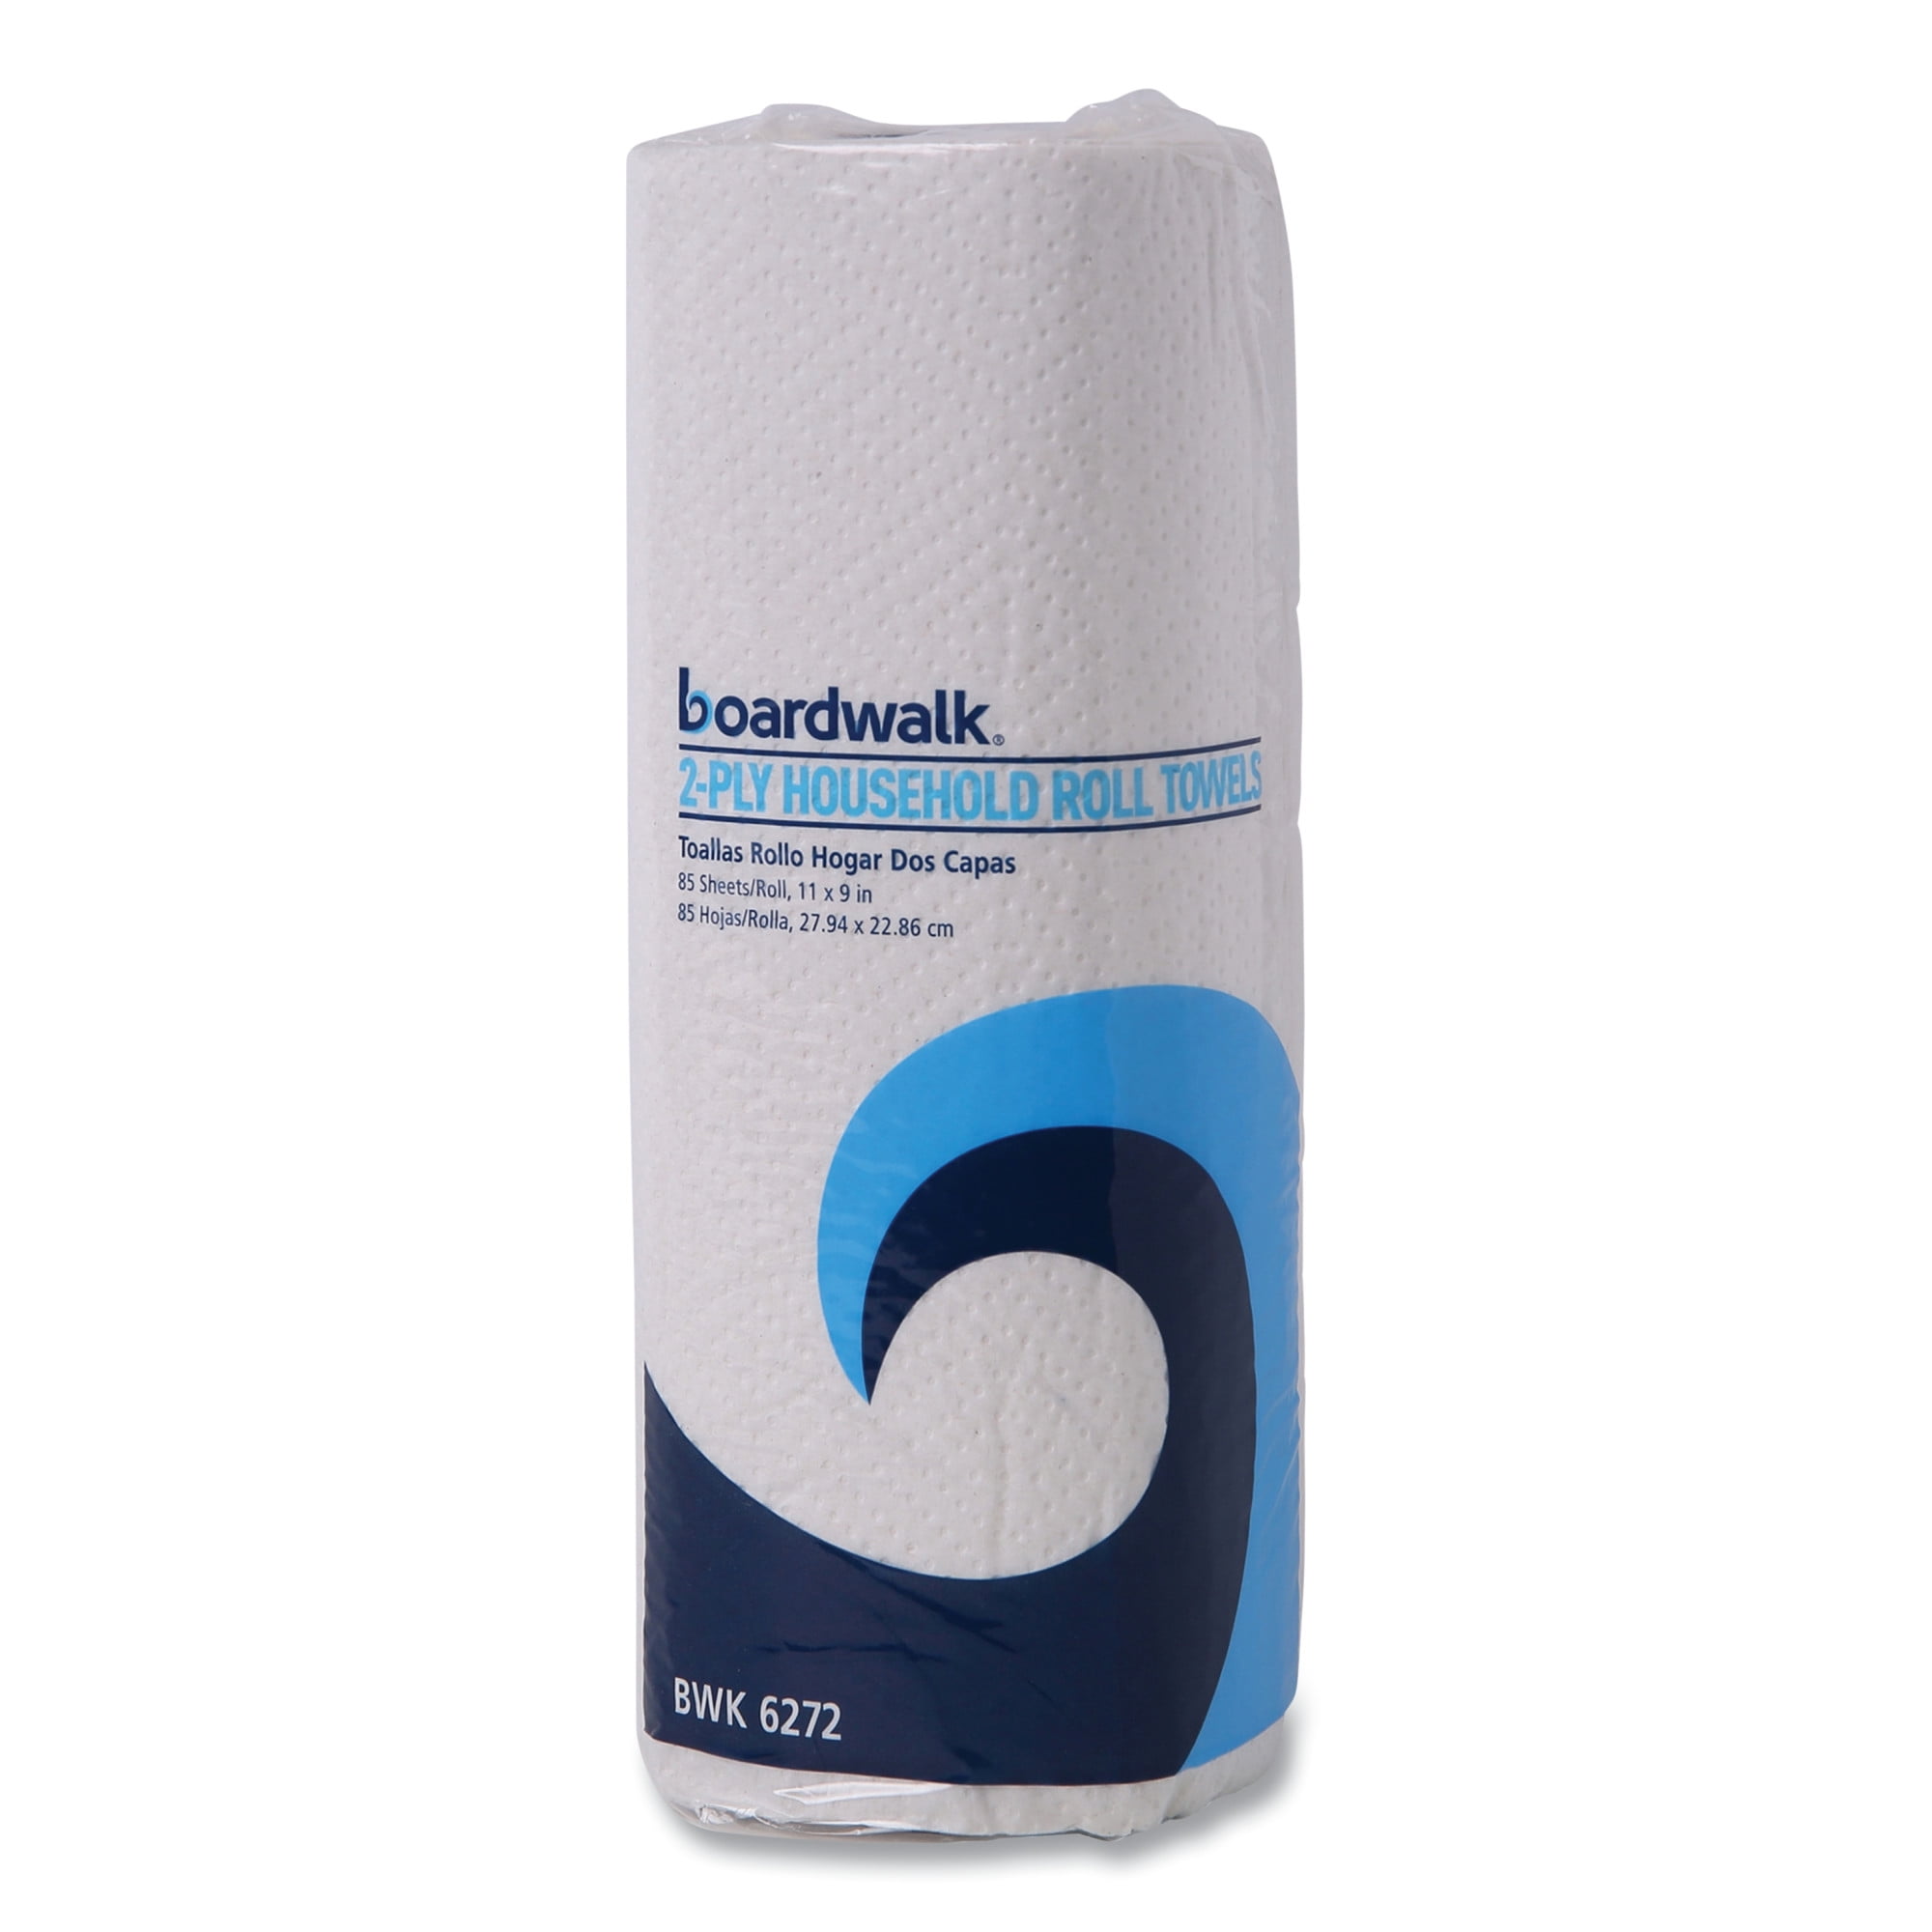 SafePro Pt, 2-Ply White Paper Towels Roll, 30/cs